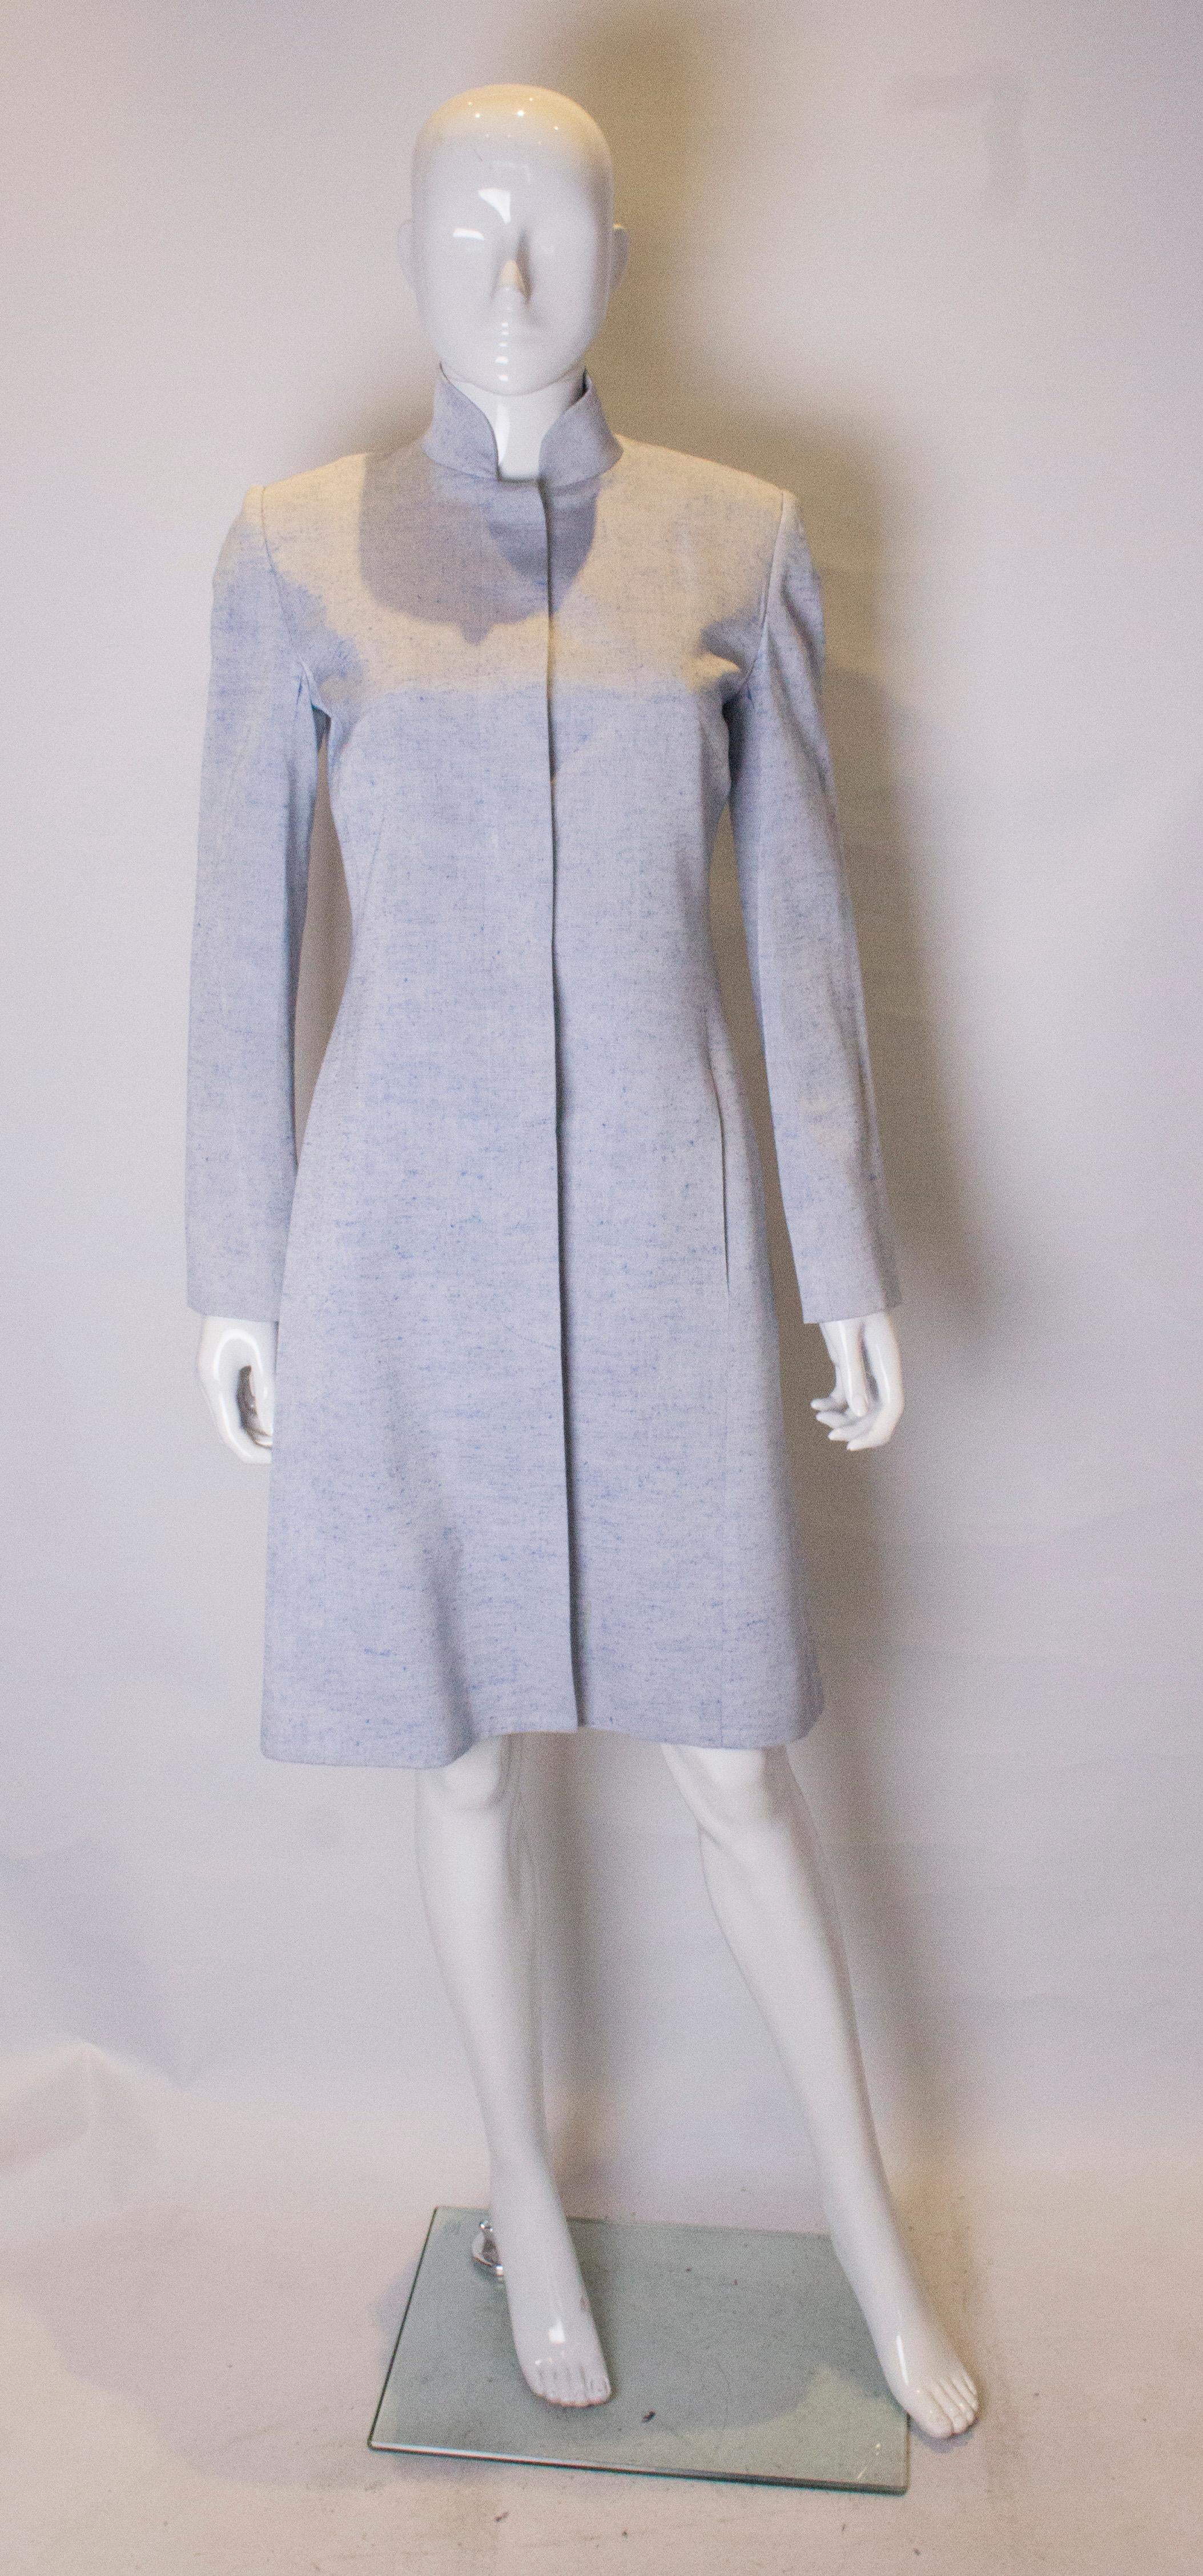 A great coat for Spring by Selina Blow. In a sky blue fabric , the coat has a nehru collar, hidden button fastenings and a pocket on either side It is fully lined.